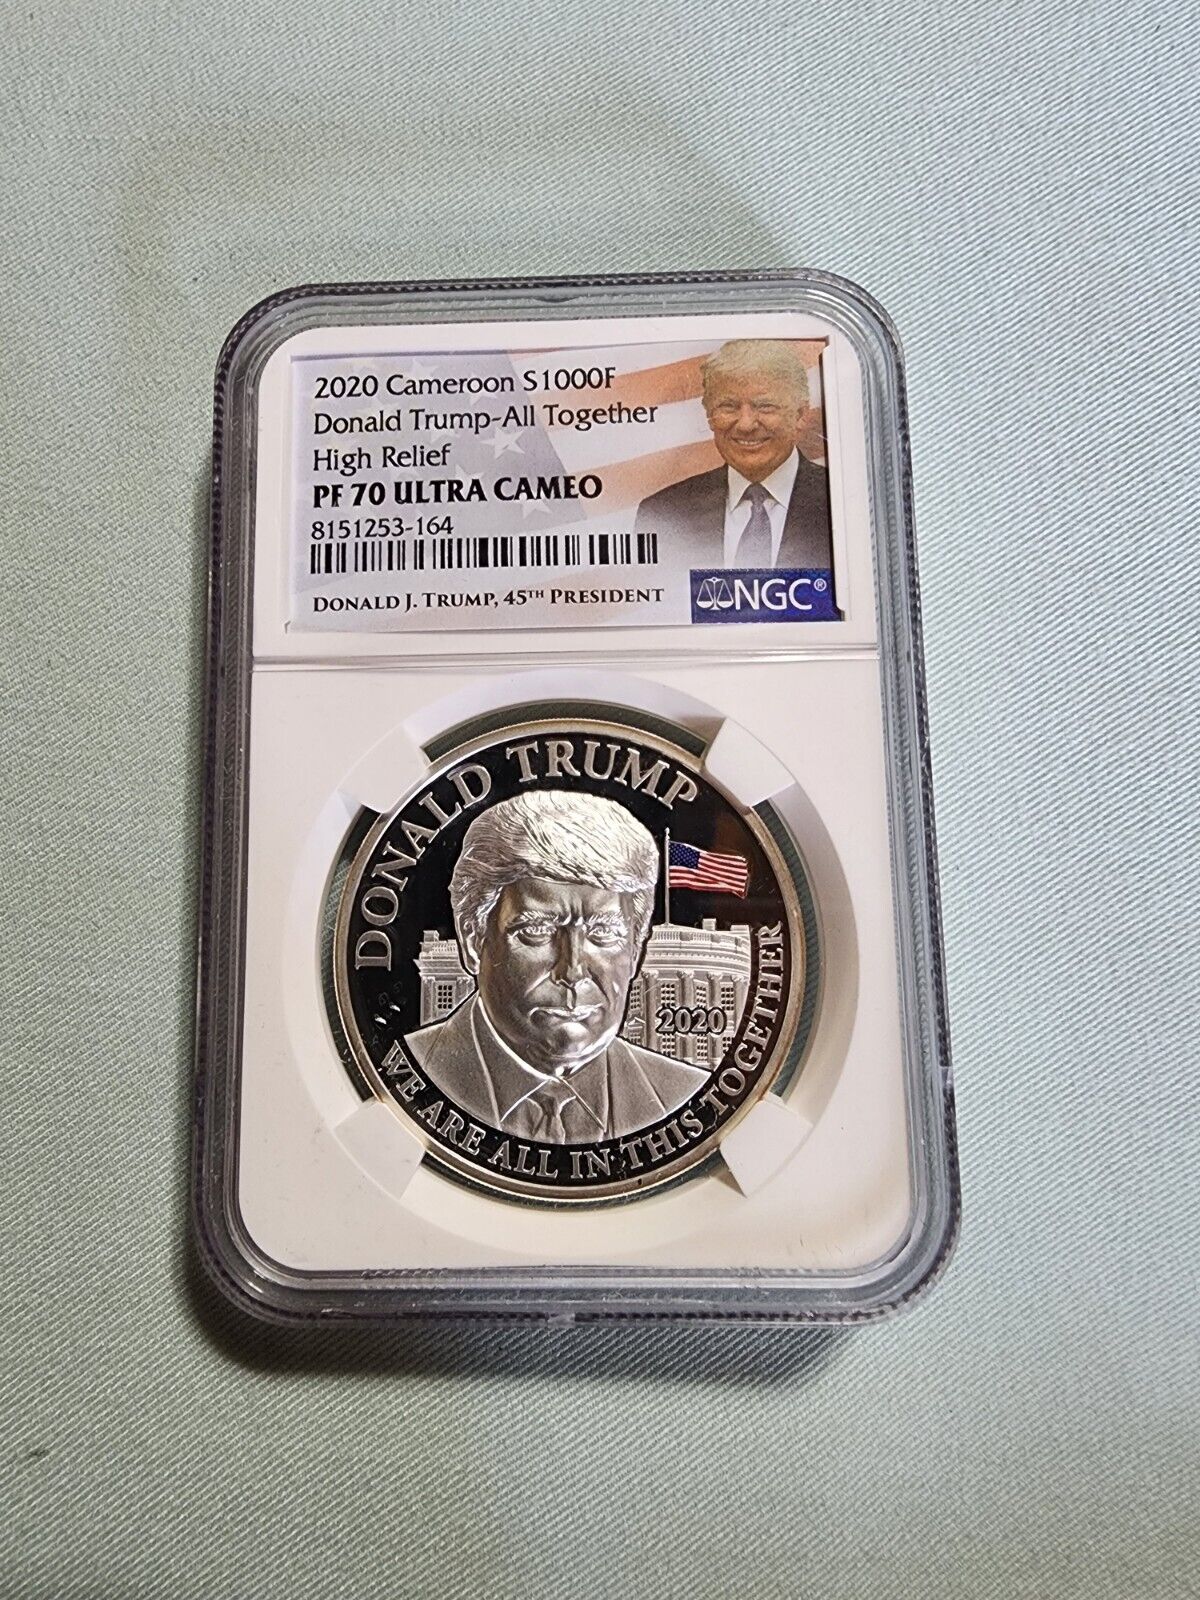 2020 Cameroon 1000F 1oz Silver Donald Trump High Relief NGC PF70 Ultra Cameo 